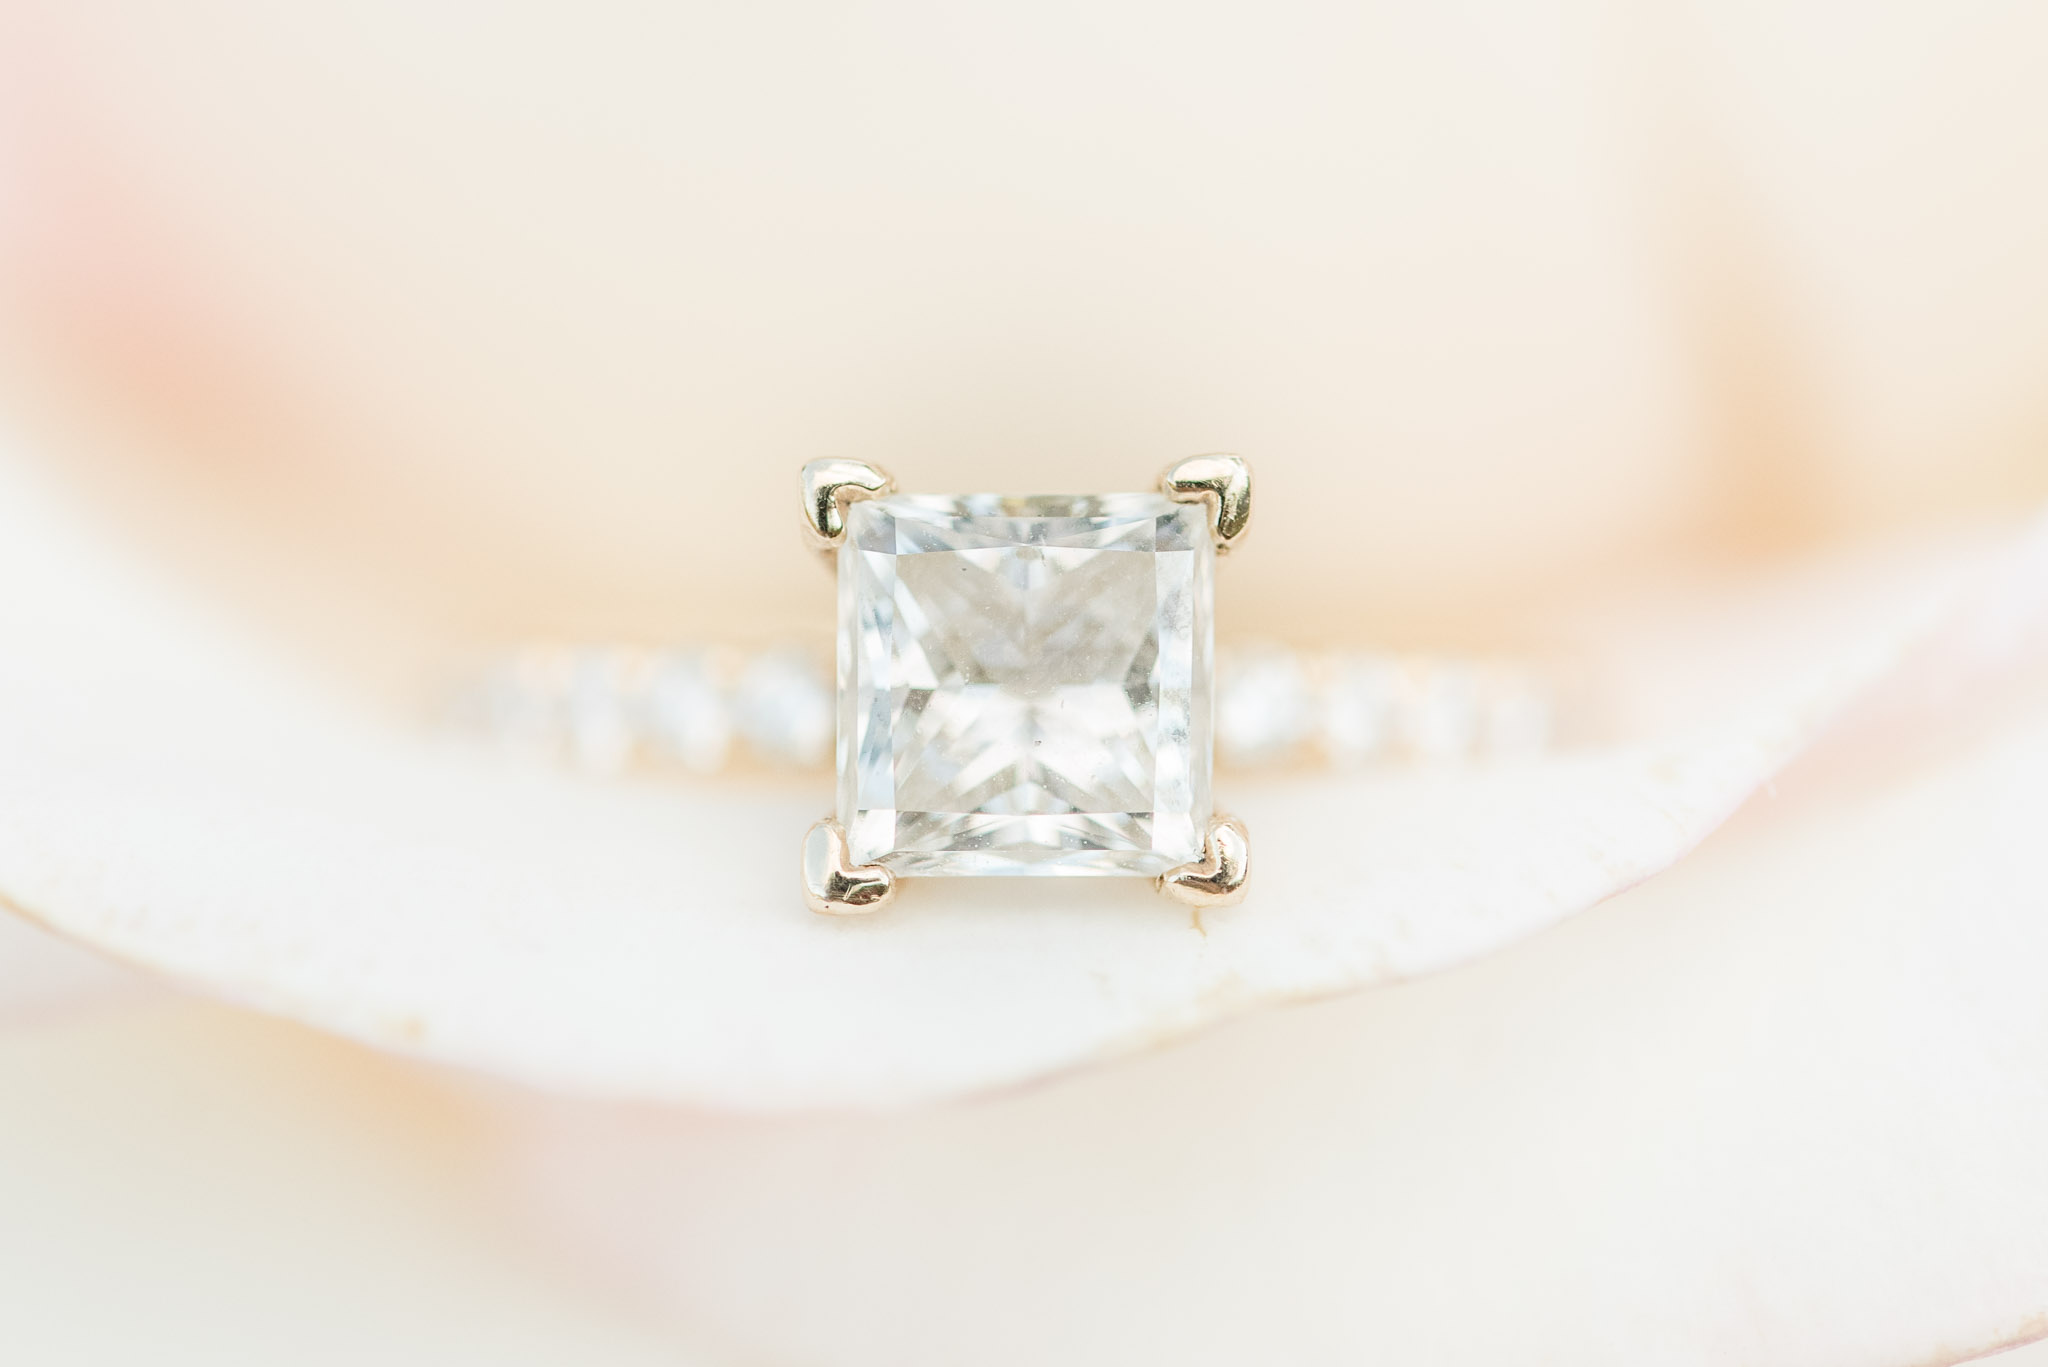 Square diamond ring sits in flower.